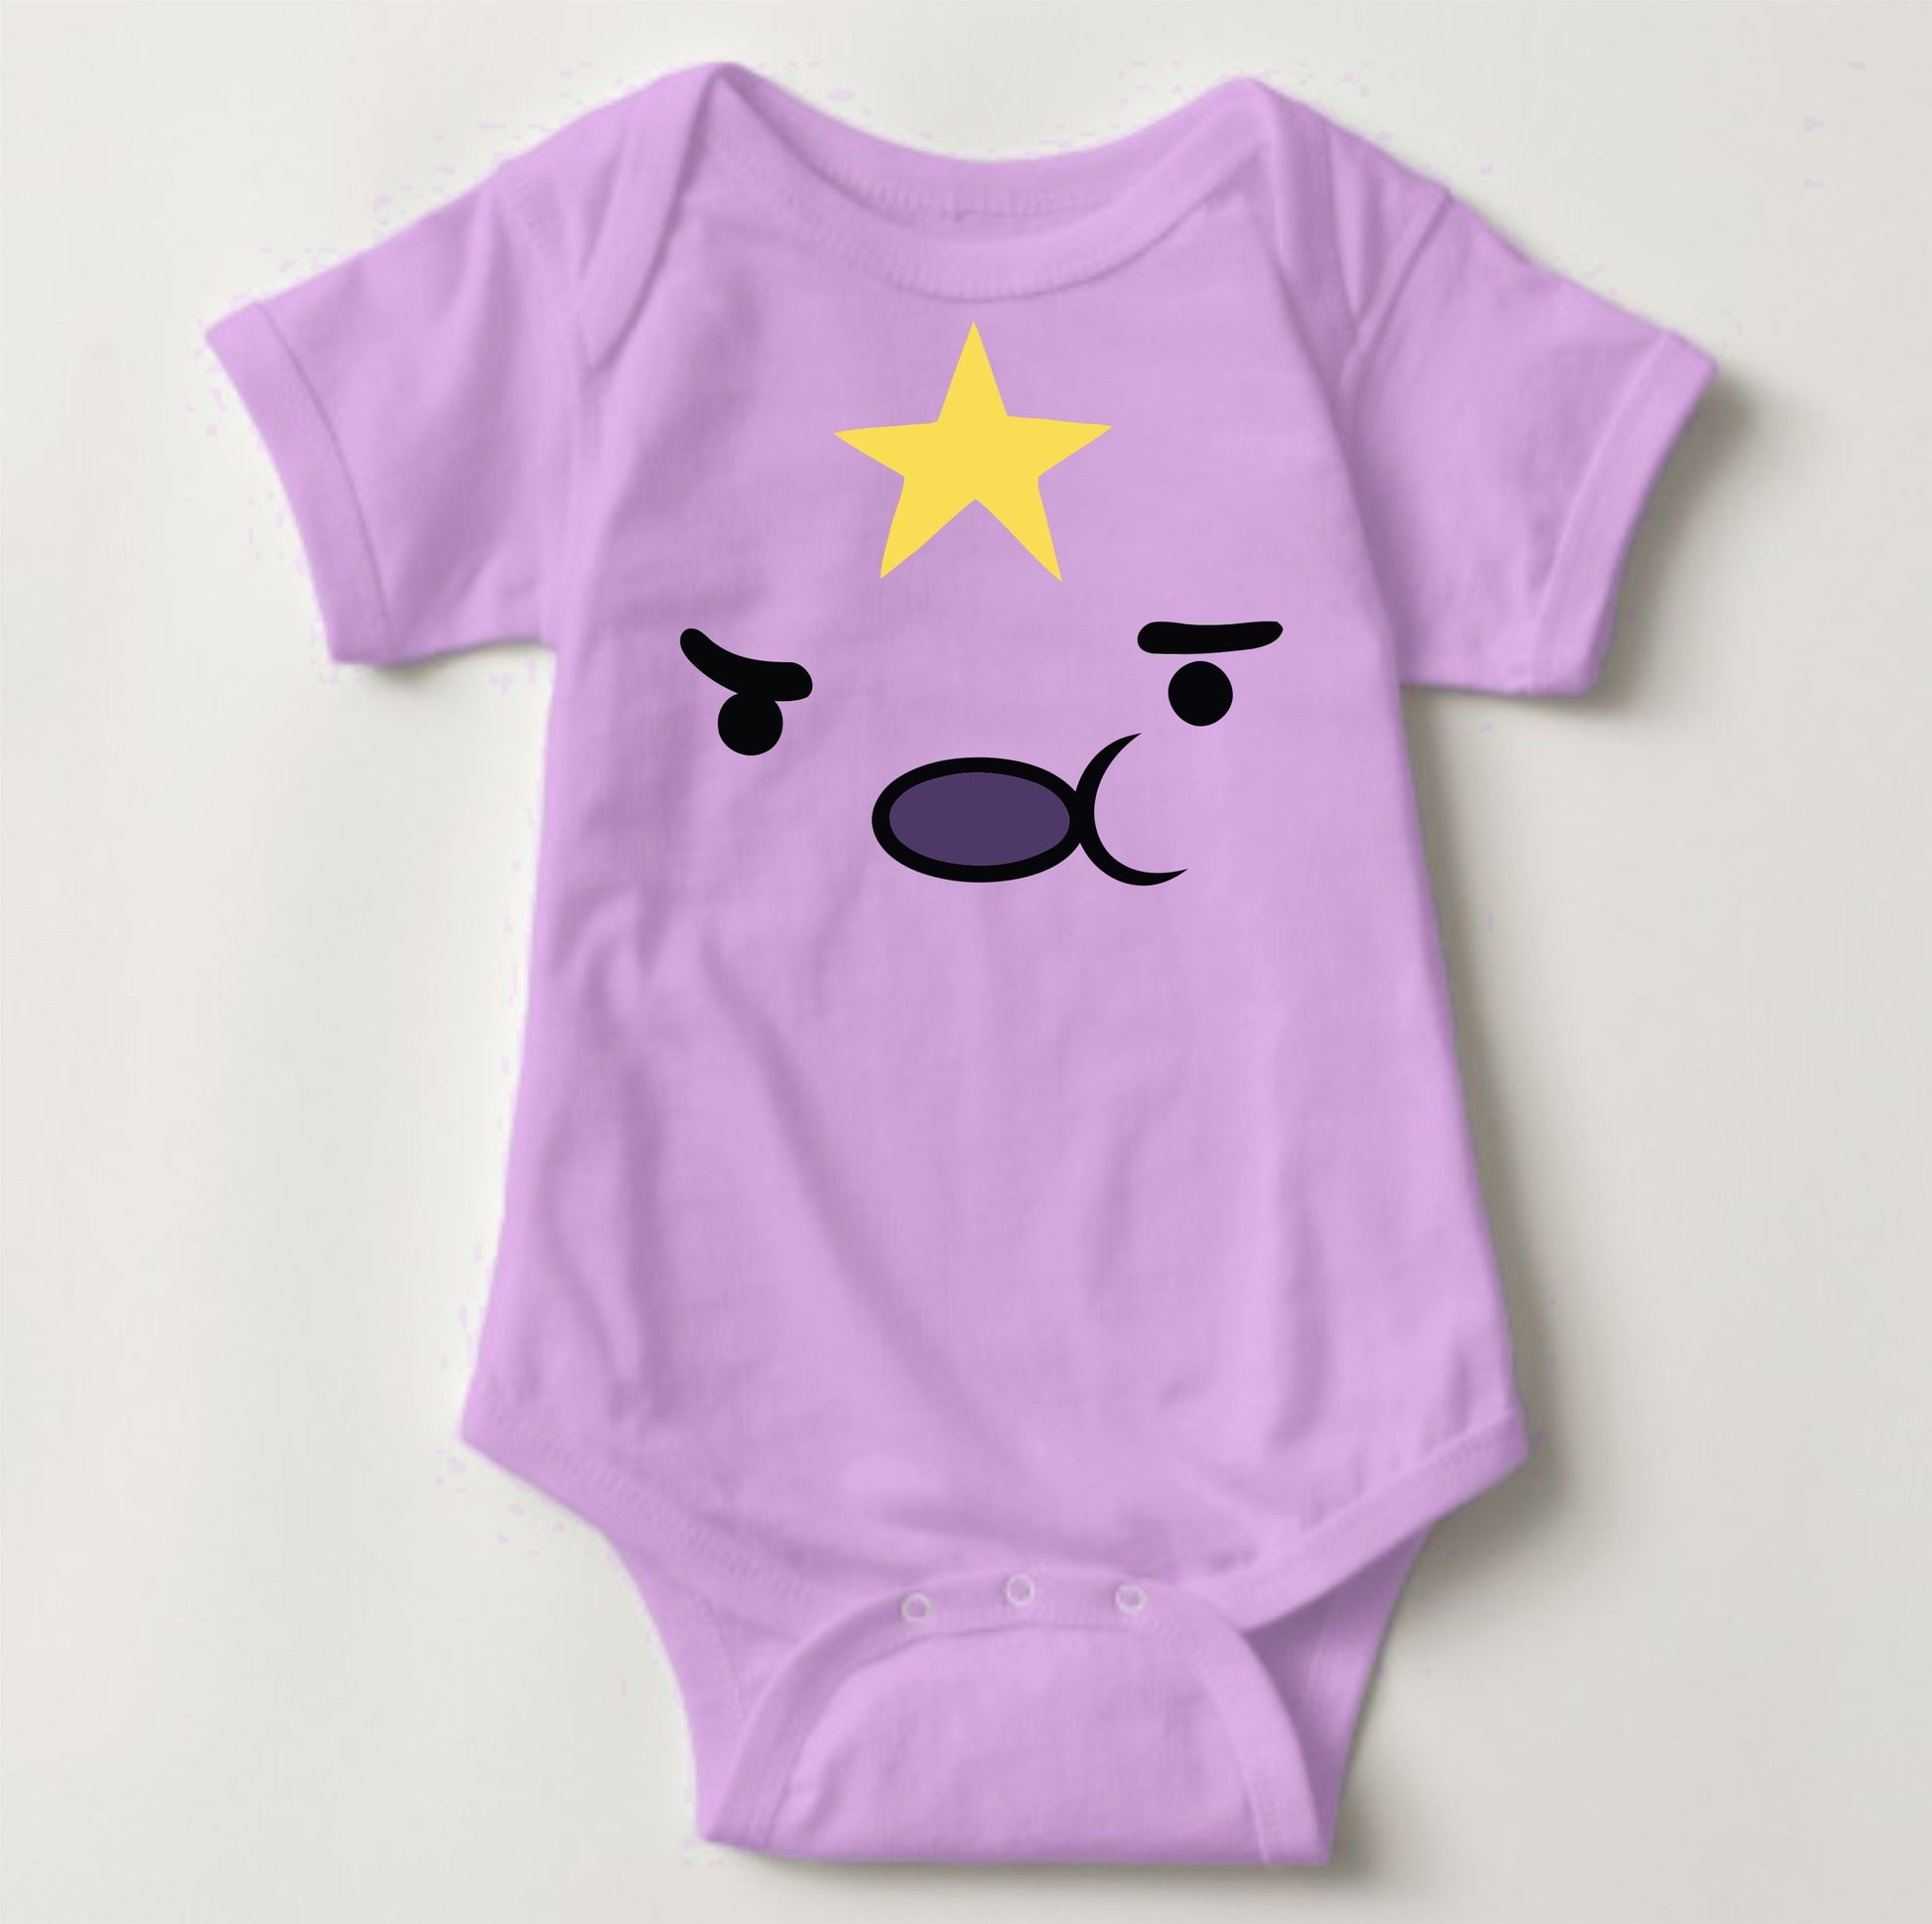 Baby Character Onesies with FREE Name Back Print - Adventure Time Lumpy Princess - MYSTYLEMYCLOTHING